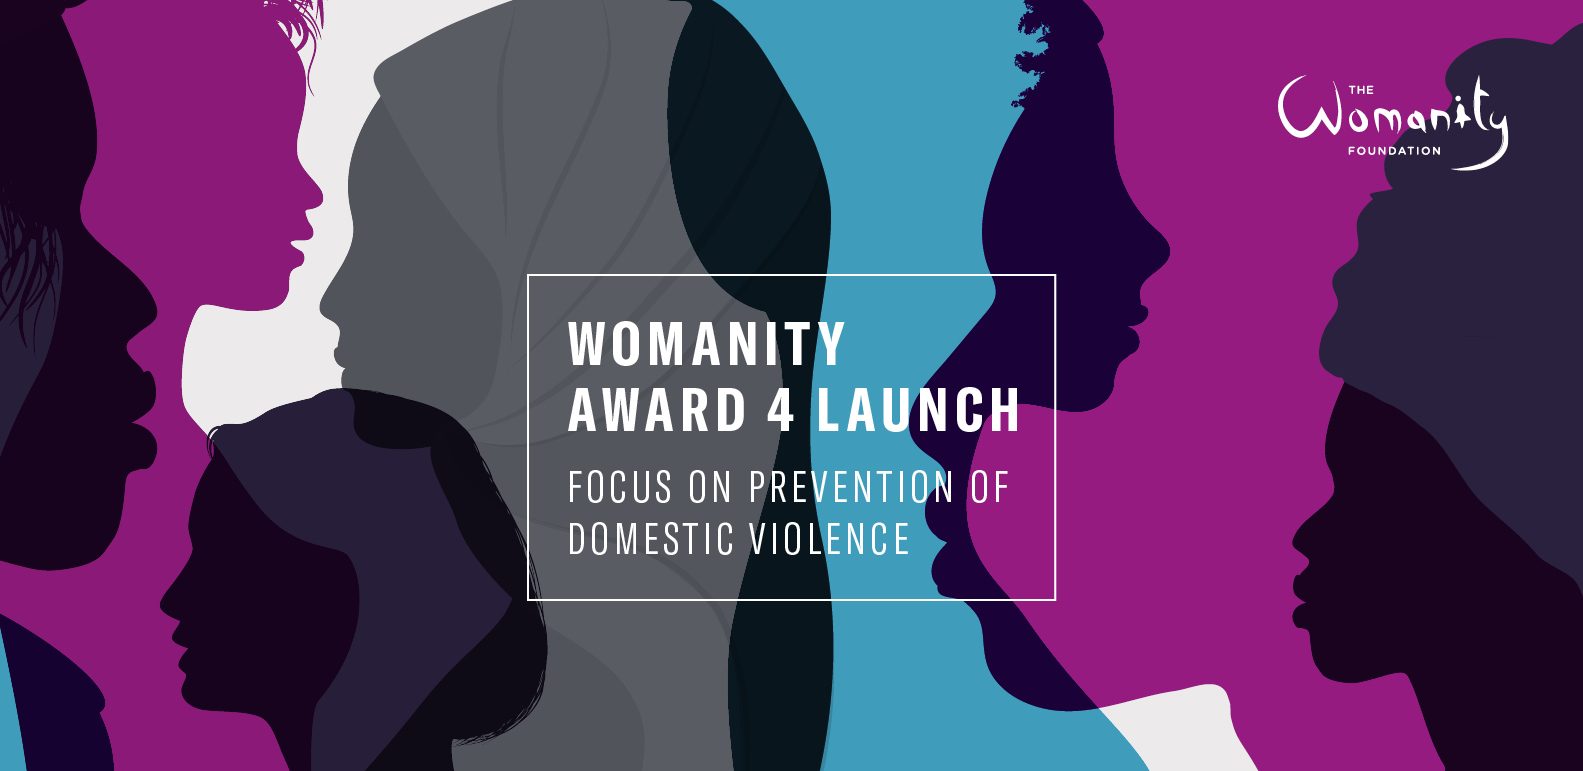 Launch of the womanity award 4 Womanity Foundation